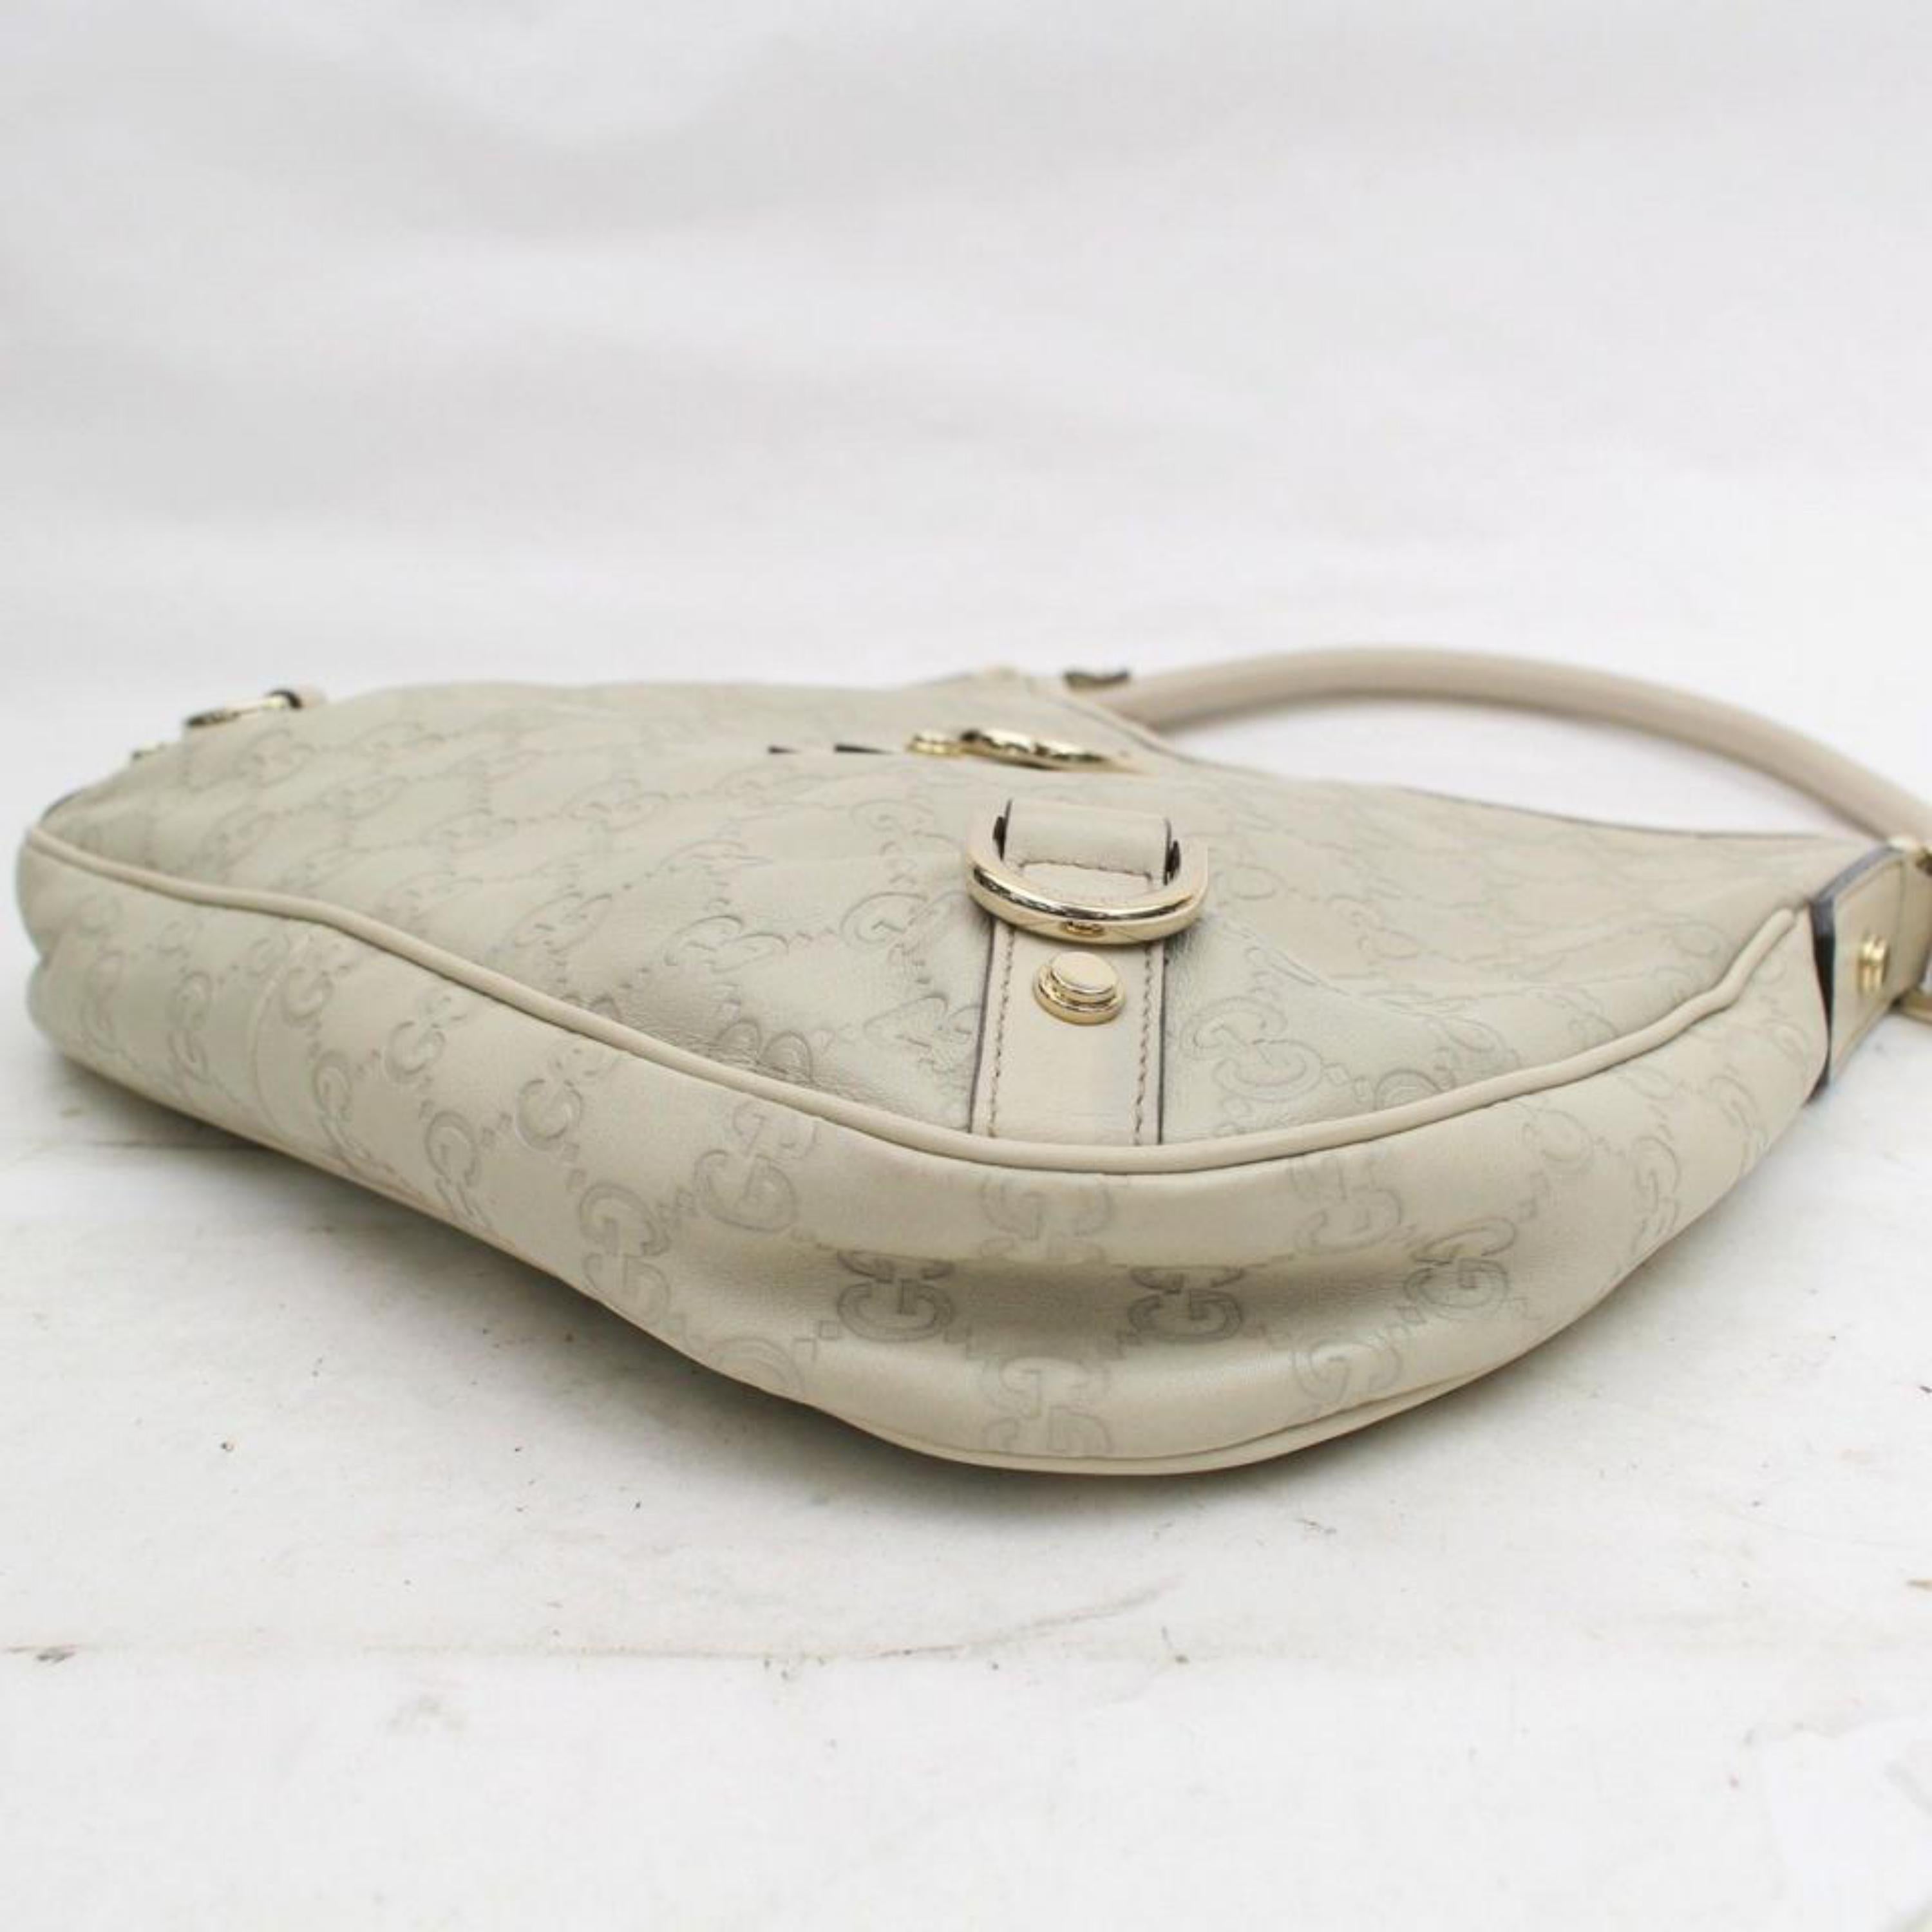 Gucci Ivory Guccissima D Ring Hobo 868308 Cream Leather Shoulder Bag For Sale 7